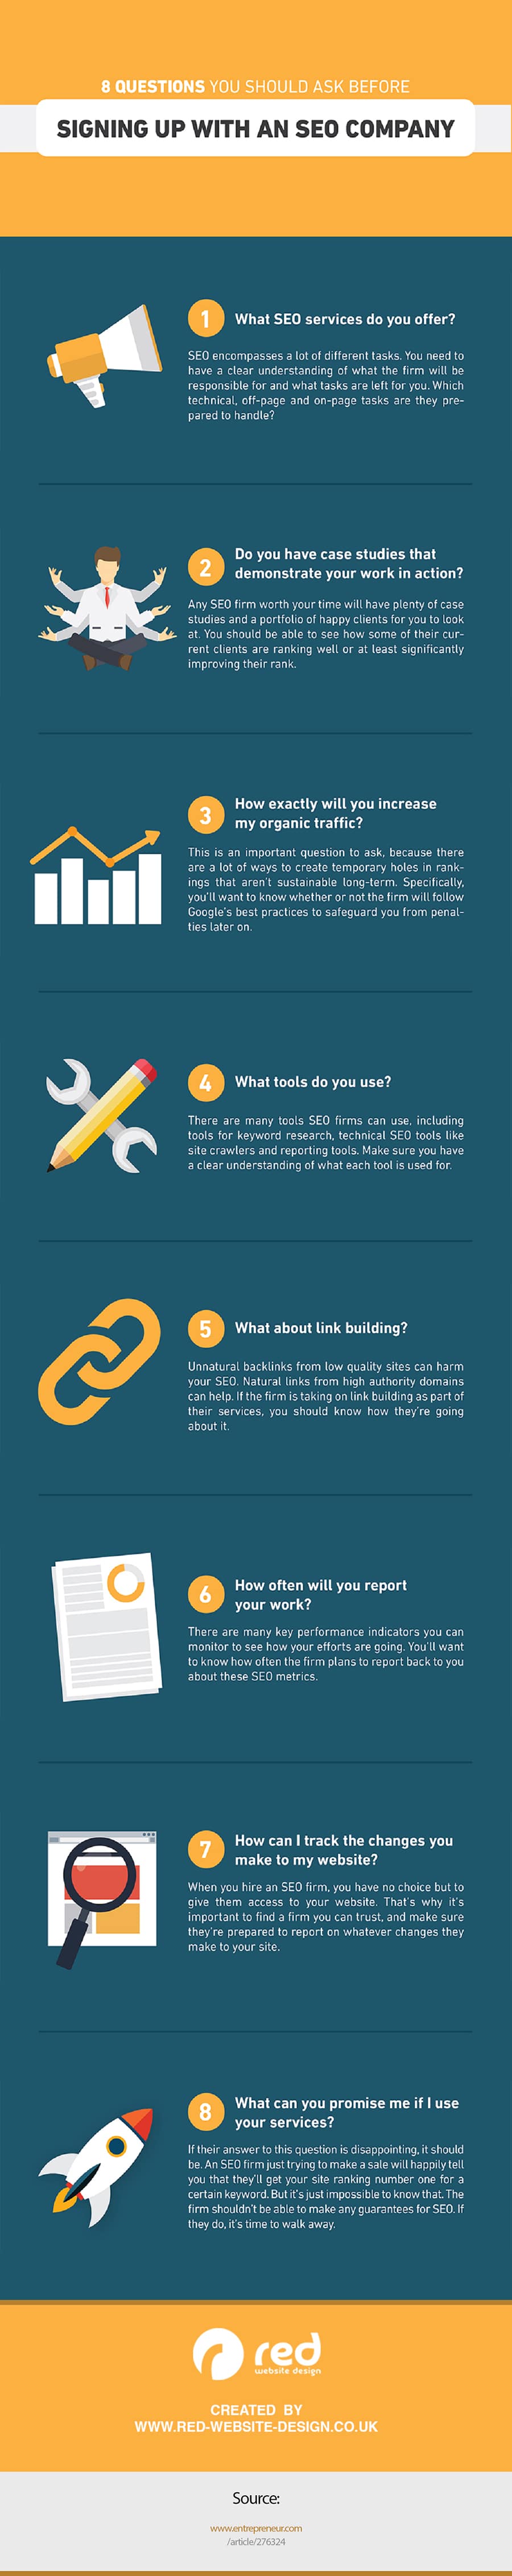 8 Questions To Ask Before Using An SEO Company [Infographic]